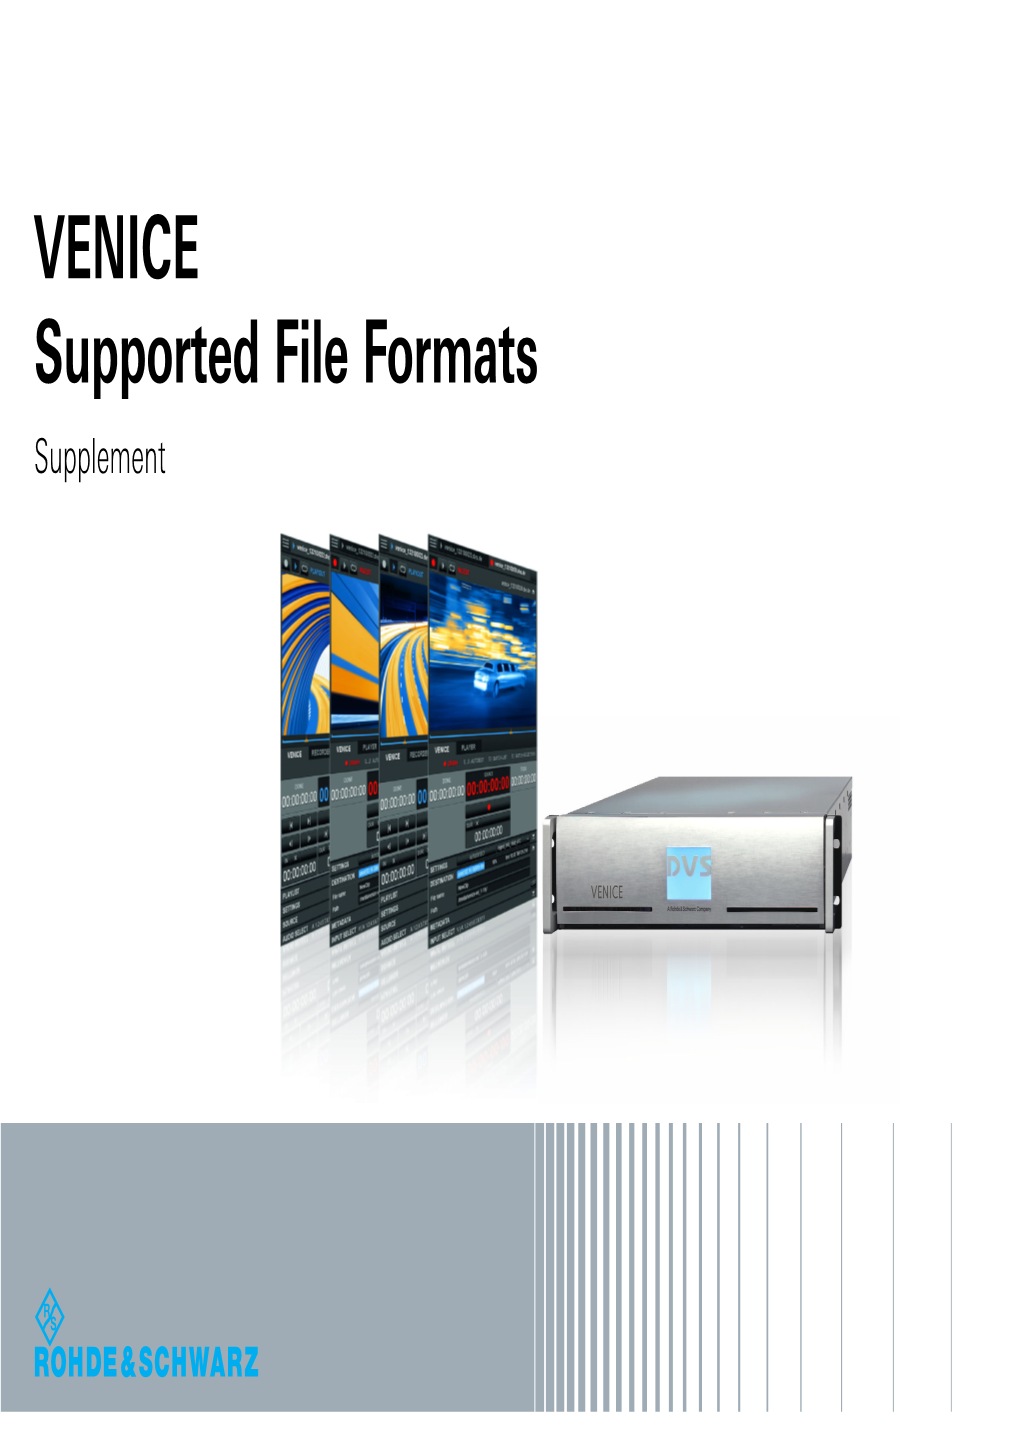 Supplement: VENICE Supported File Formats (Version 1.0)